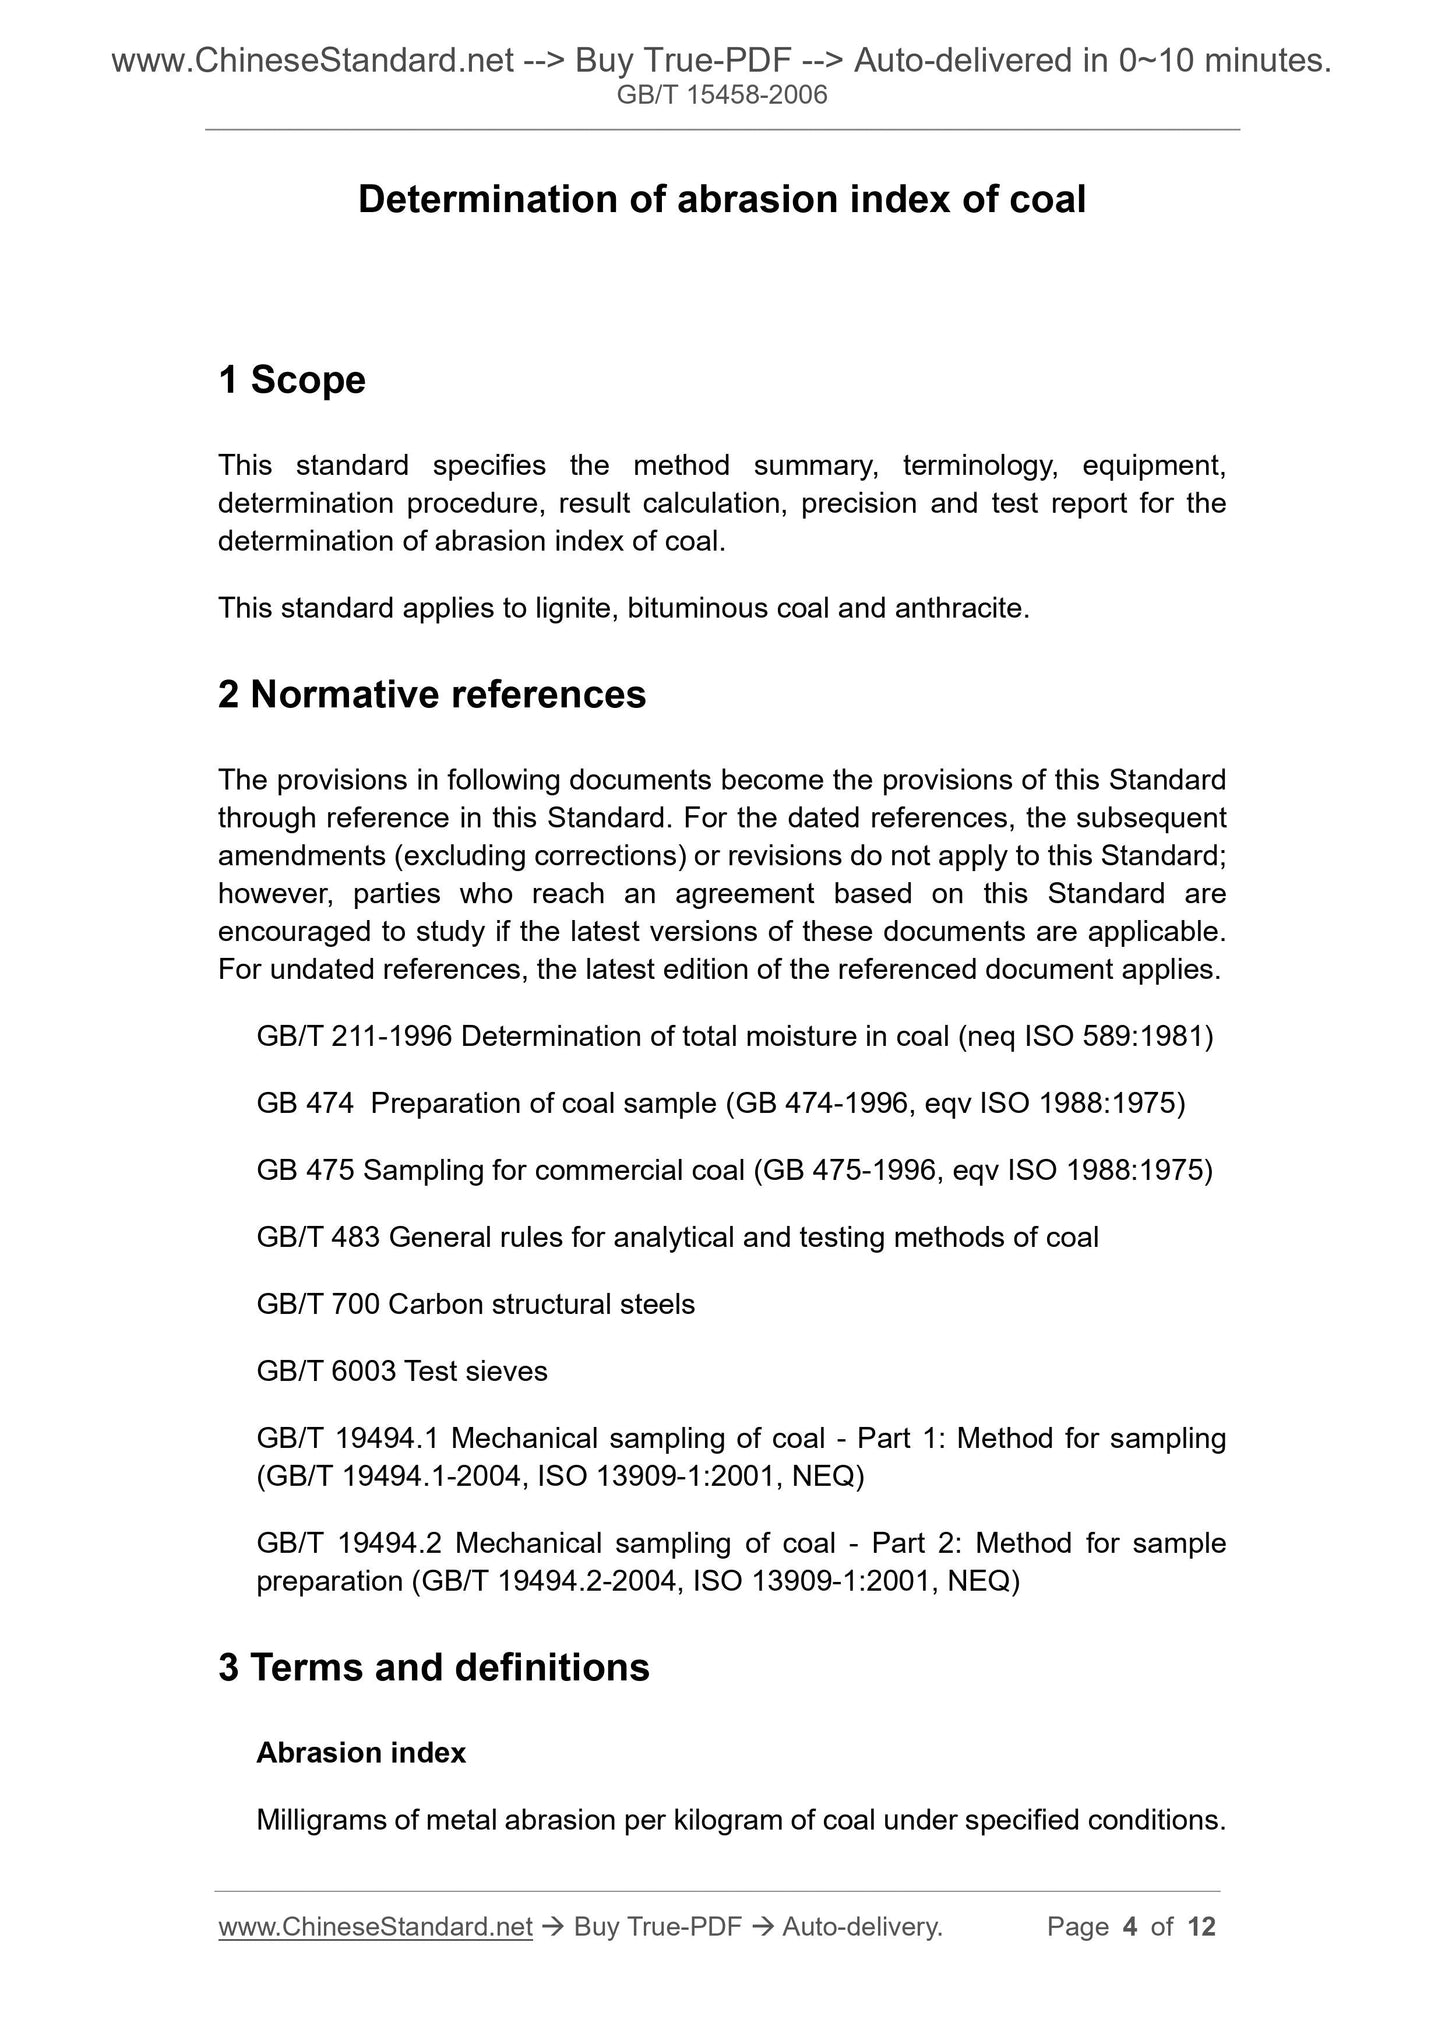 GB/T 15458-2006 Page 3